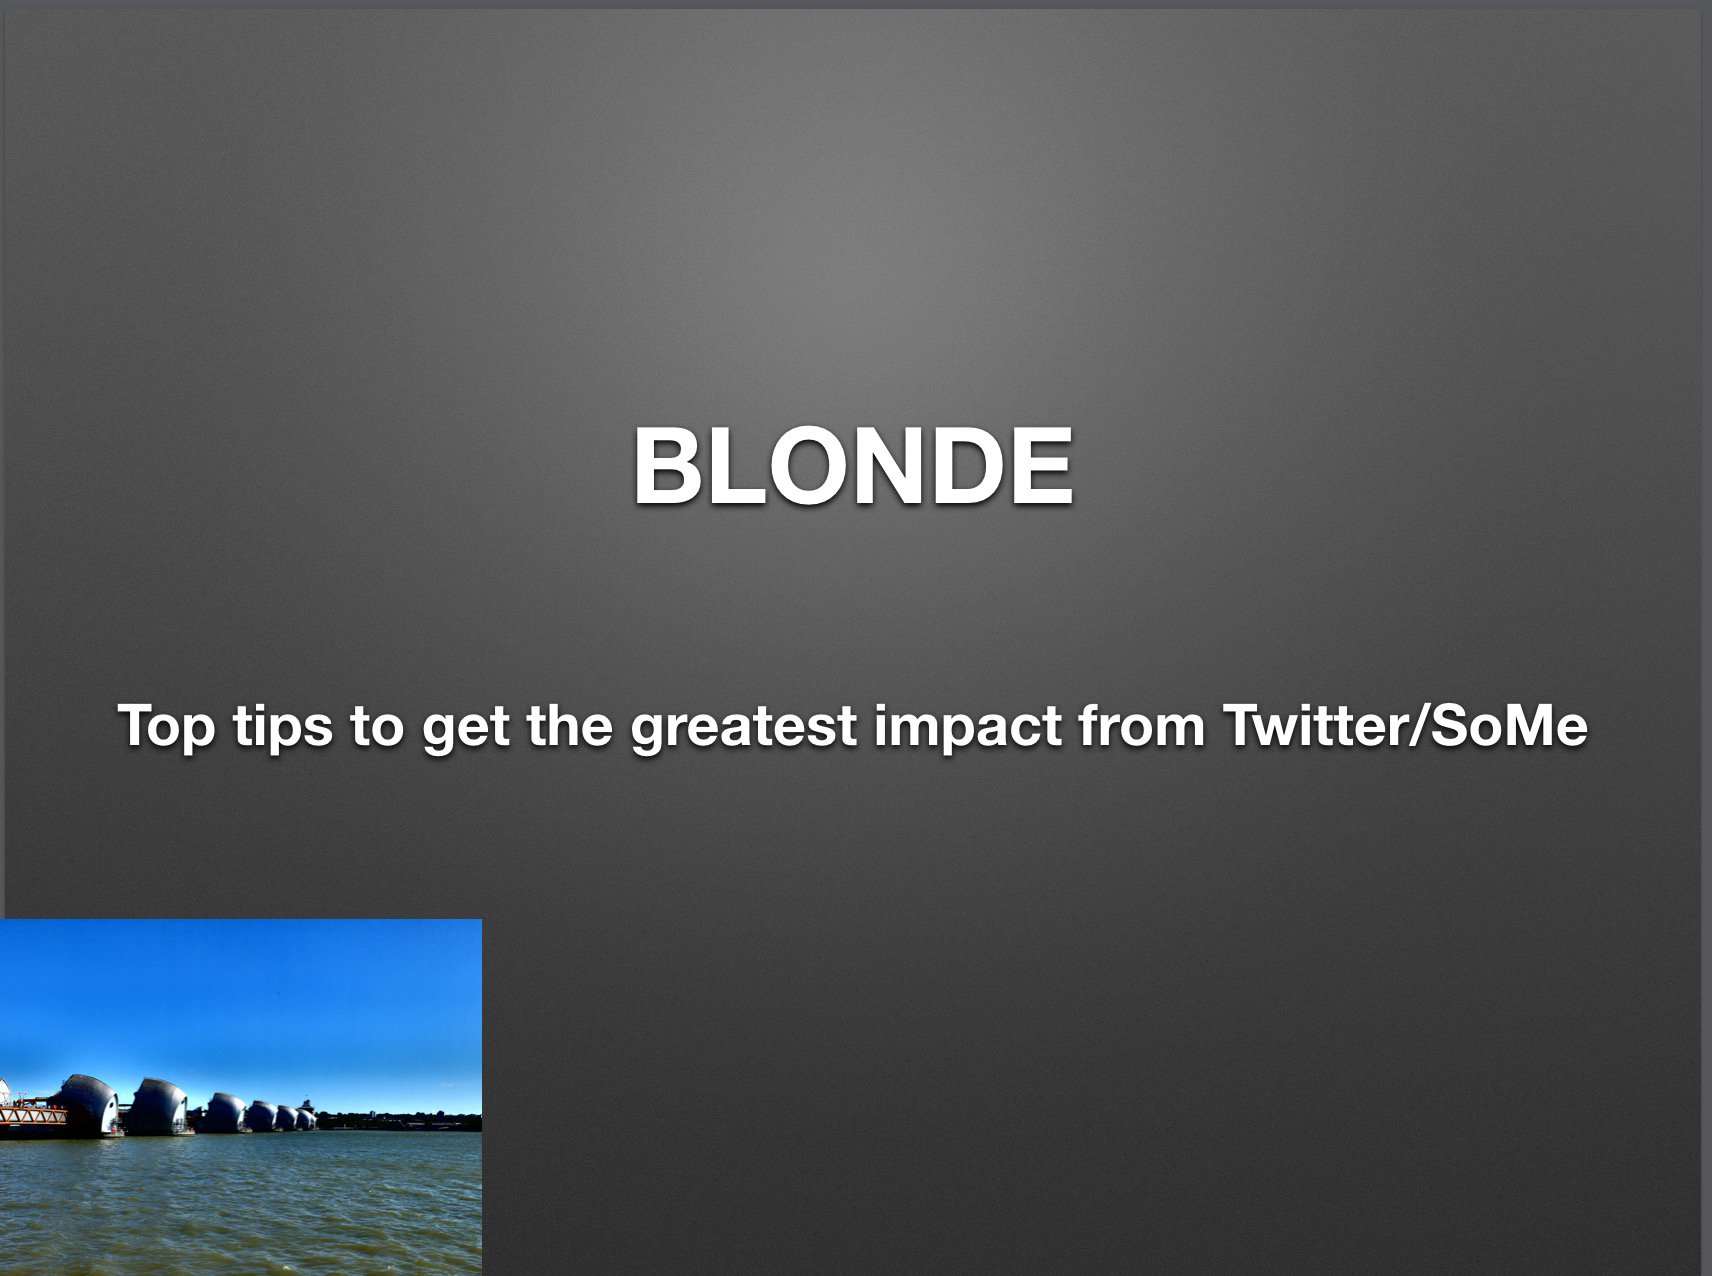 The BLONDE - top tips to engage and get the most out of twitter featured image